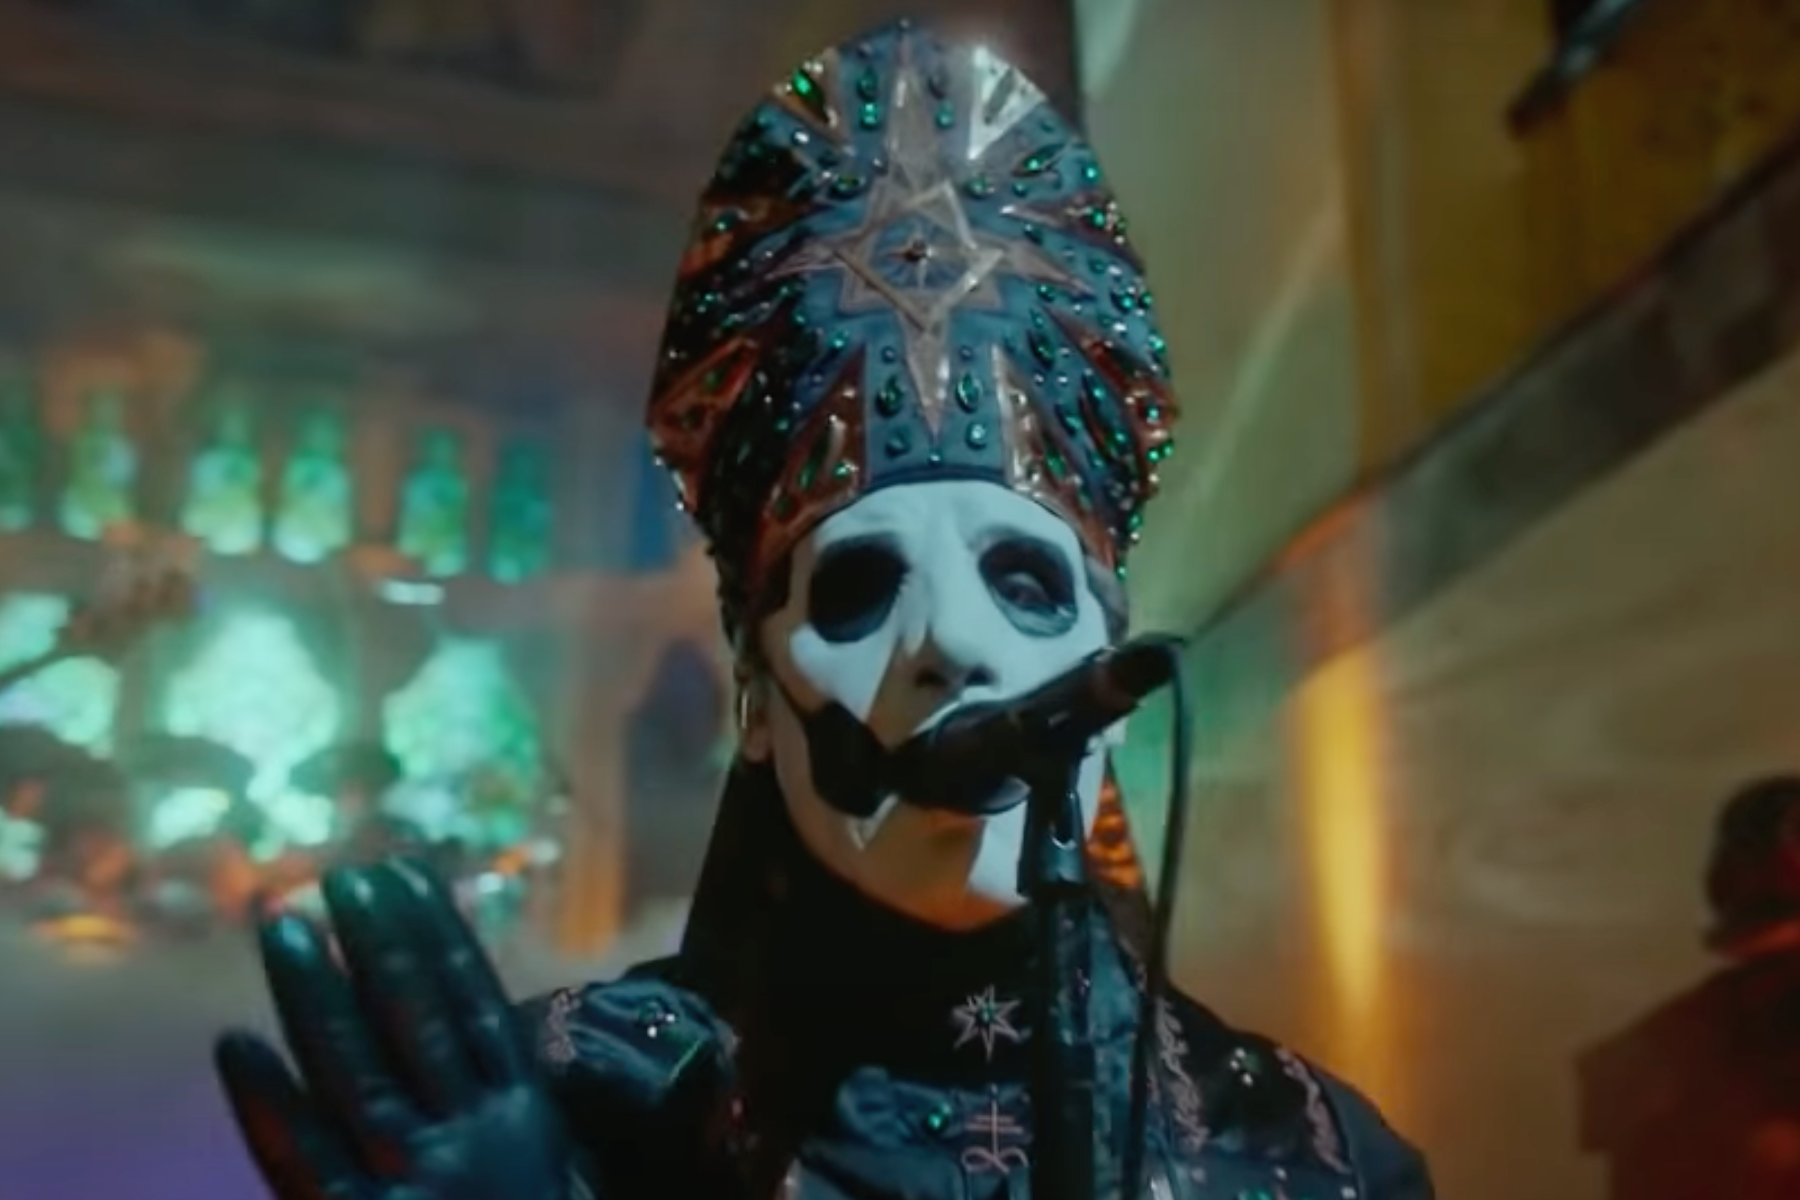 Ghost performs “Call Me Little Sunshine” in Mausoleum on the ‘Kimmel”.